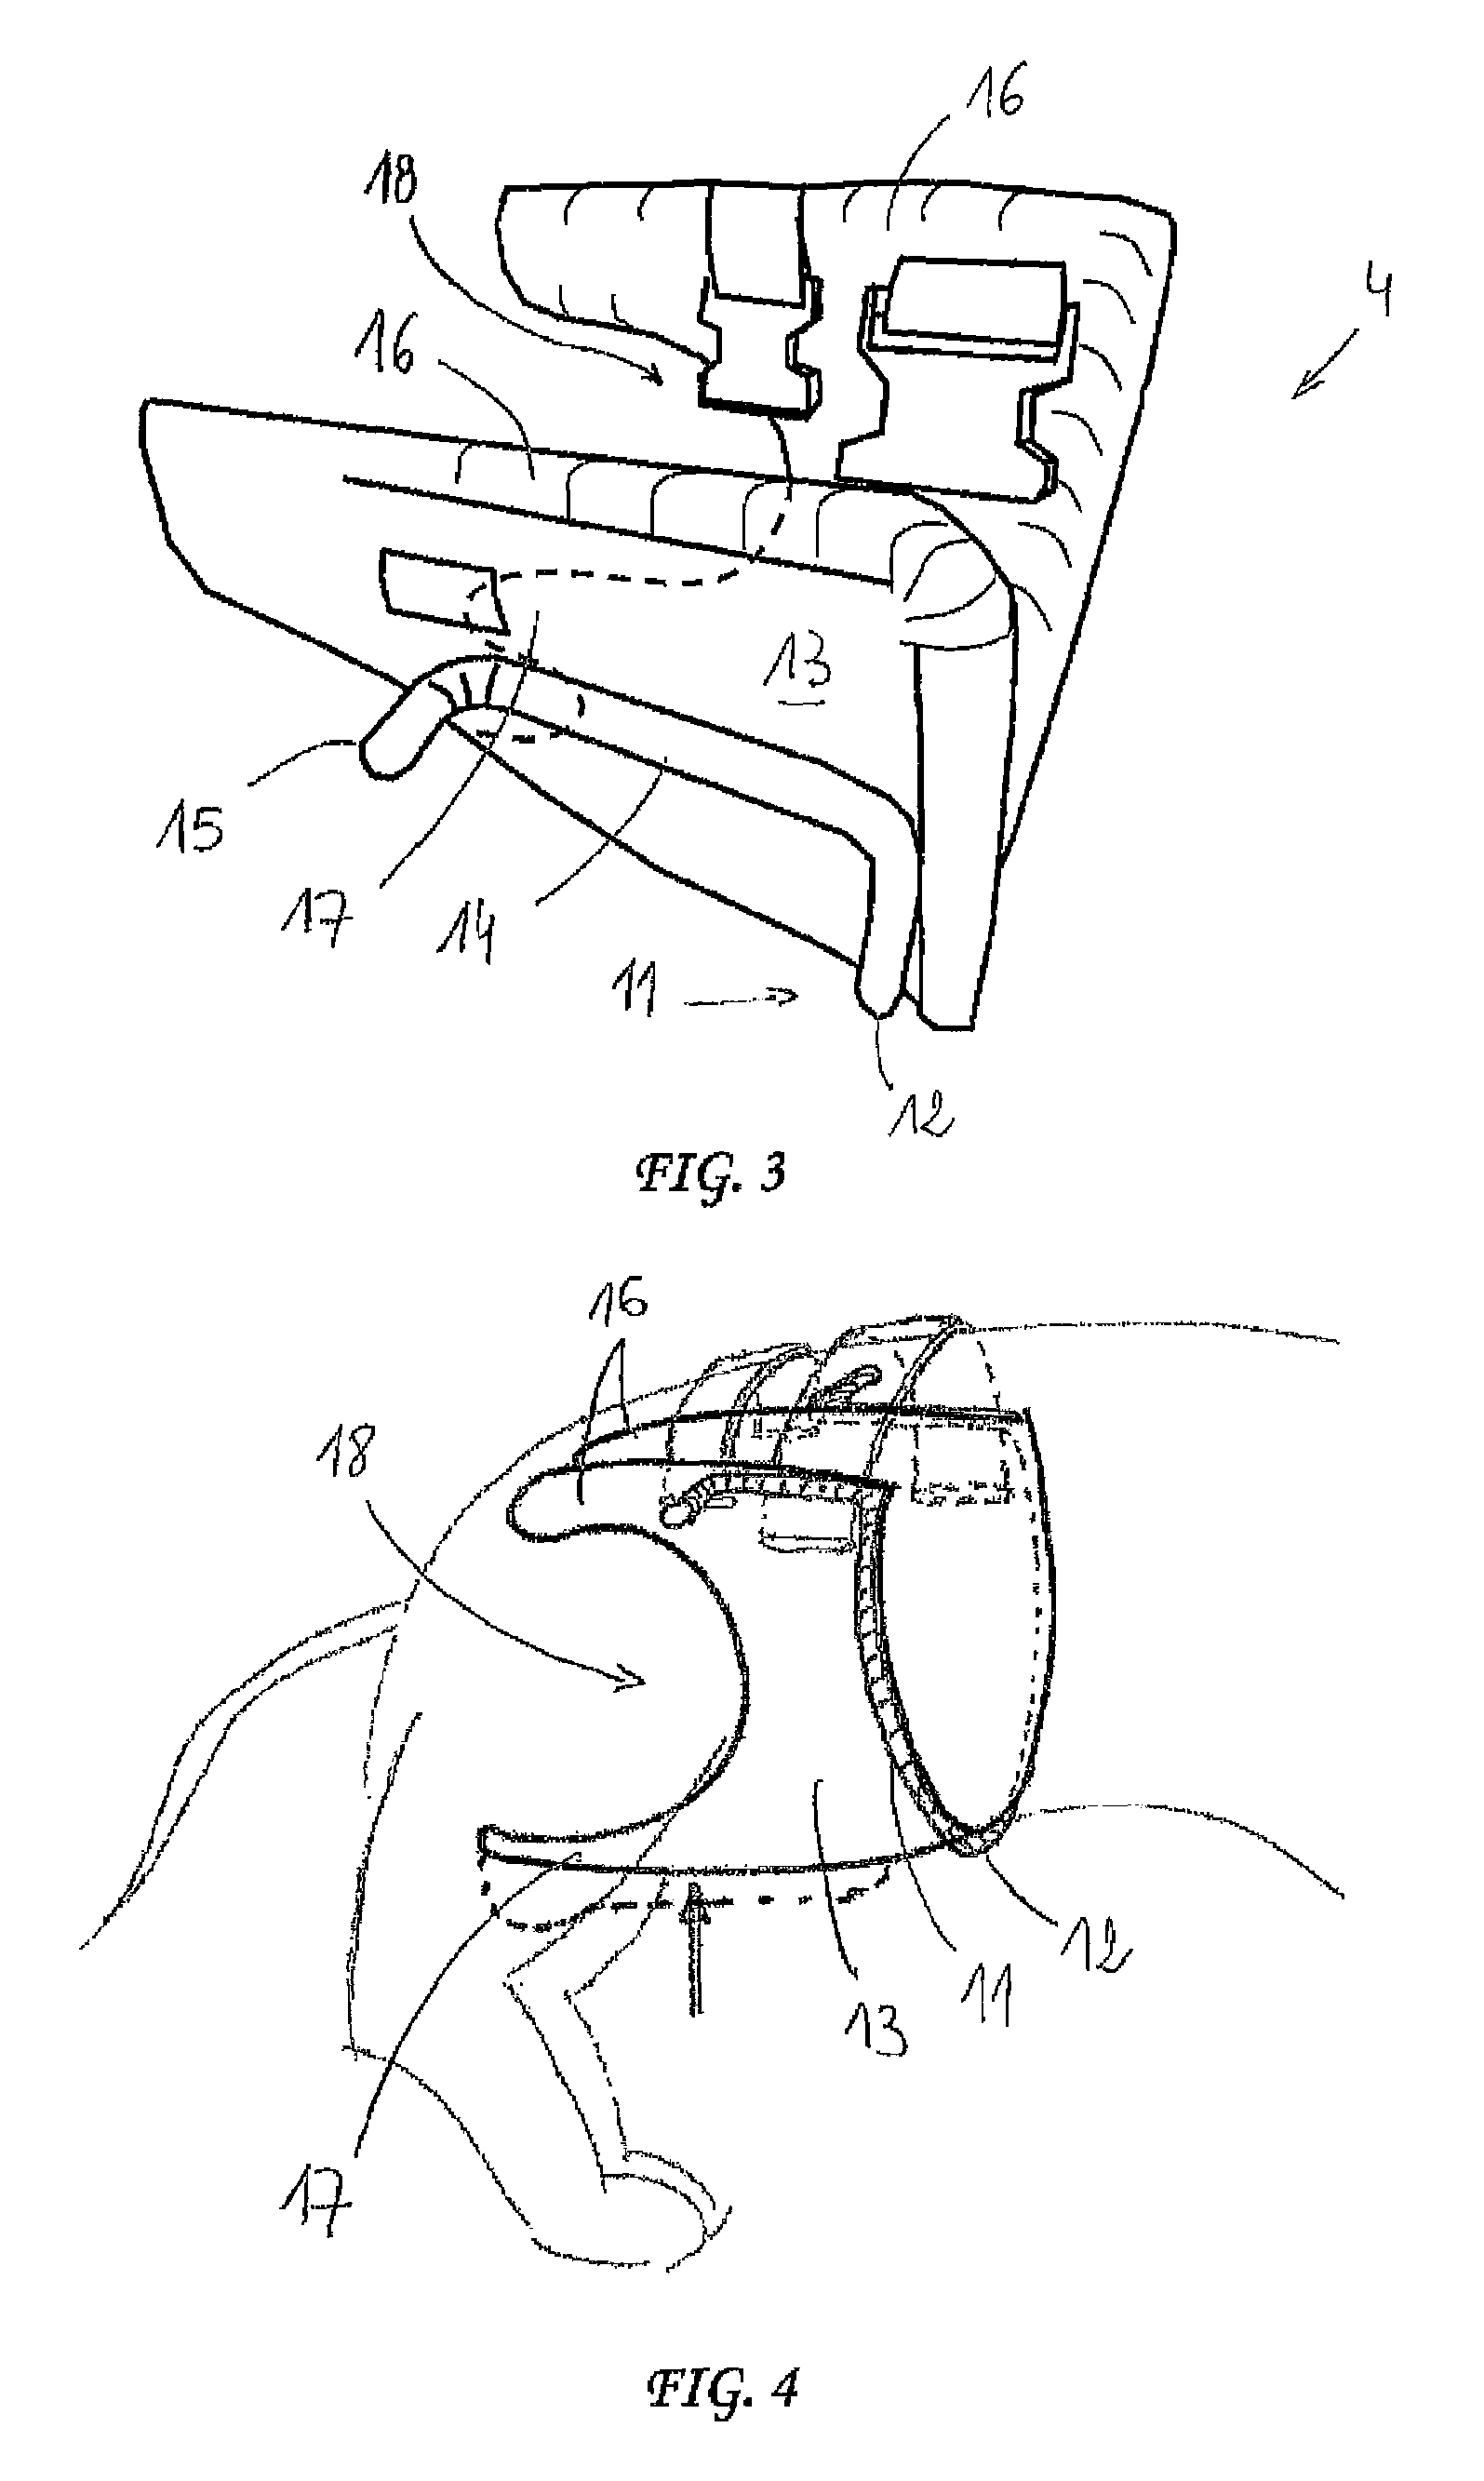 Rehabilitation or mobility assistance device for a quadruped animal